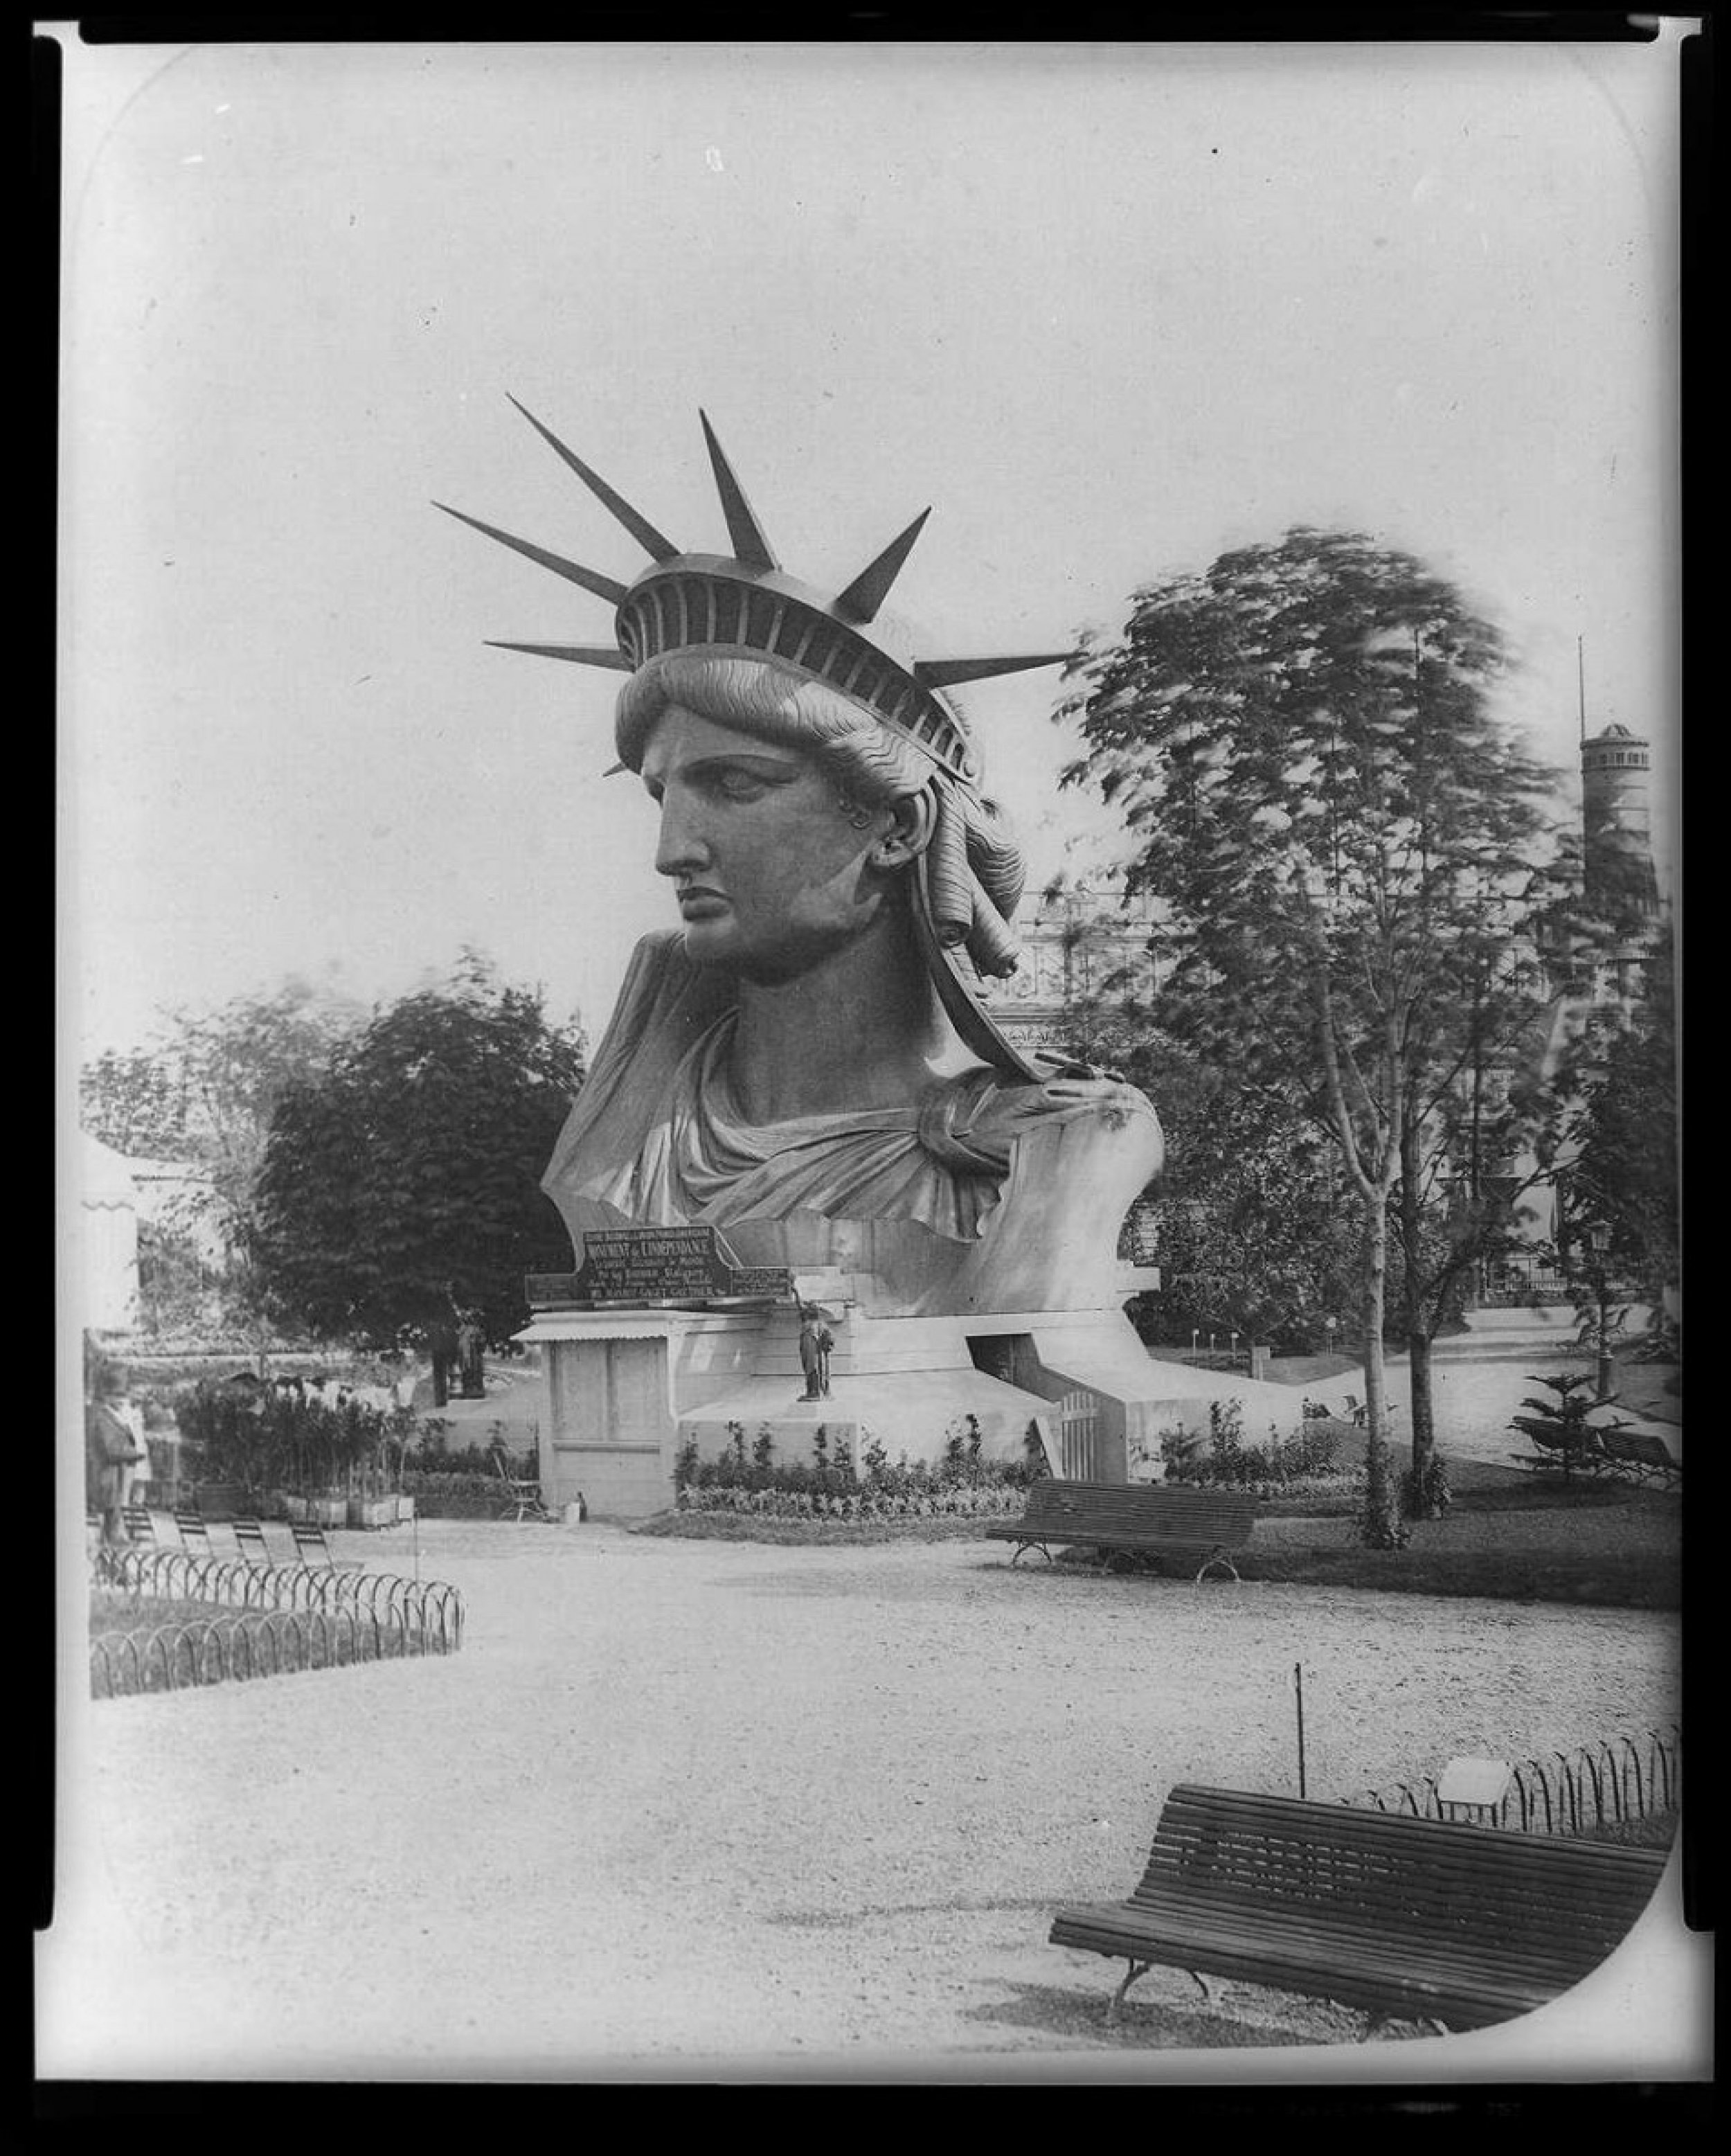 Head of Statue of Liberty on display in Paris park.